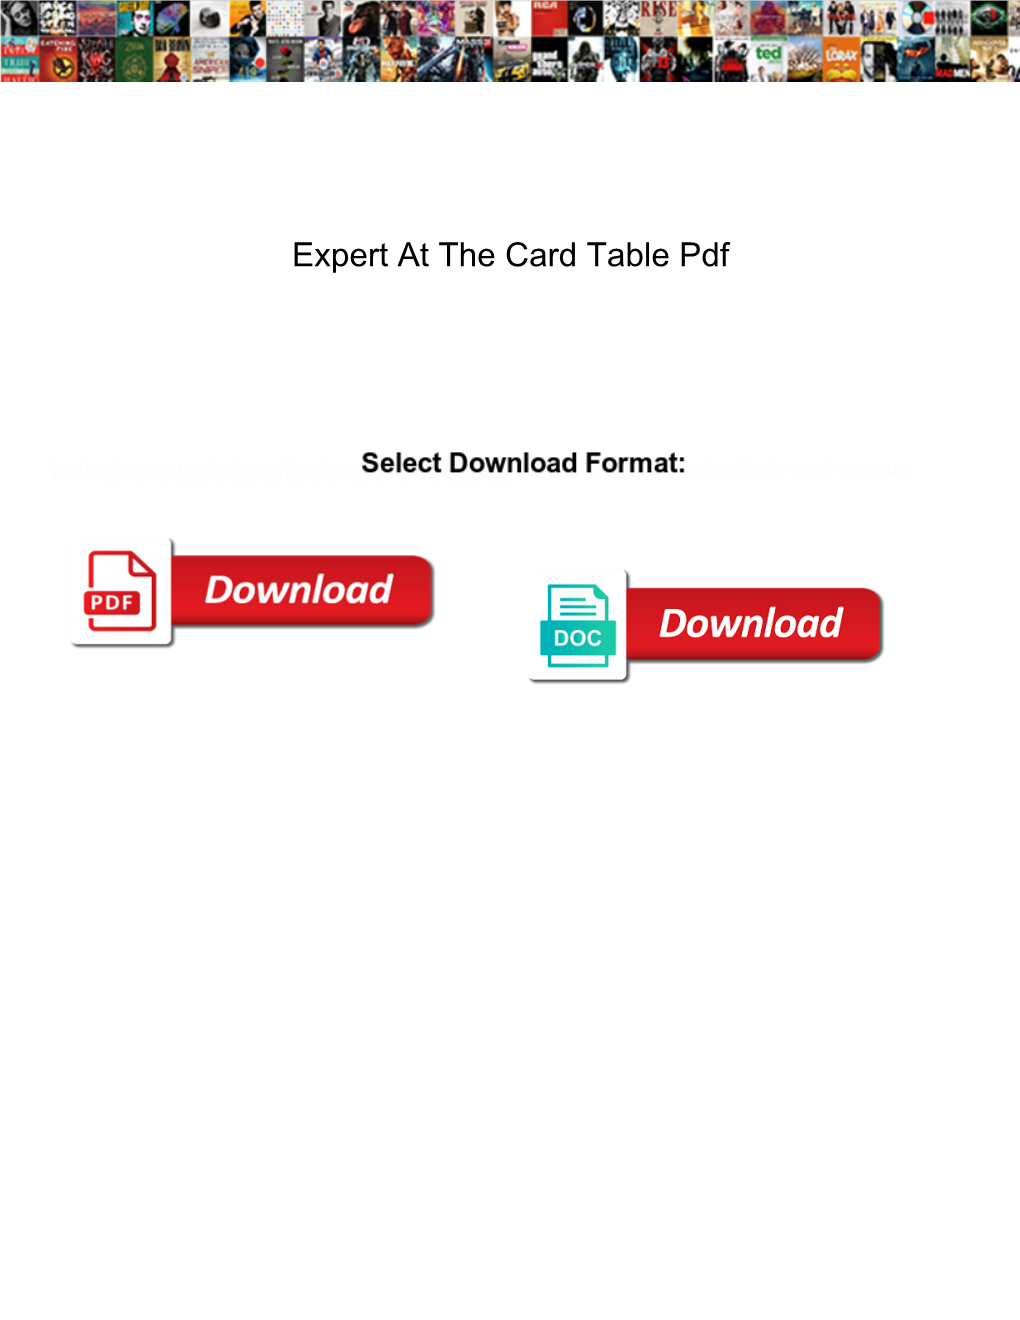 Expert at the Card Table Pdf